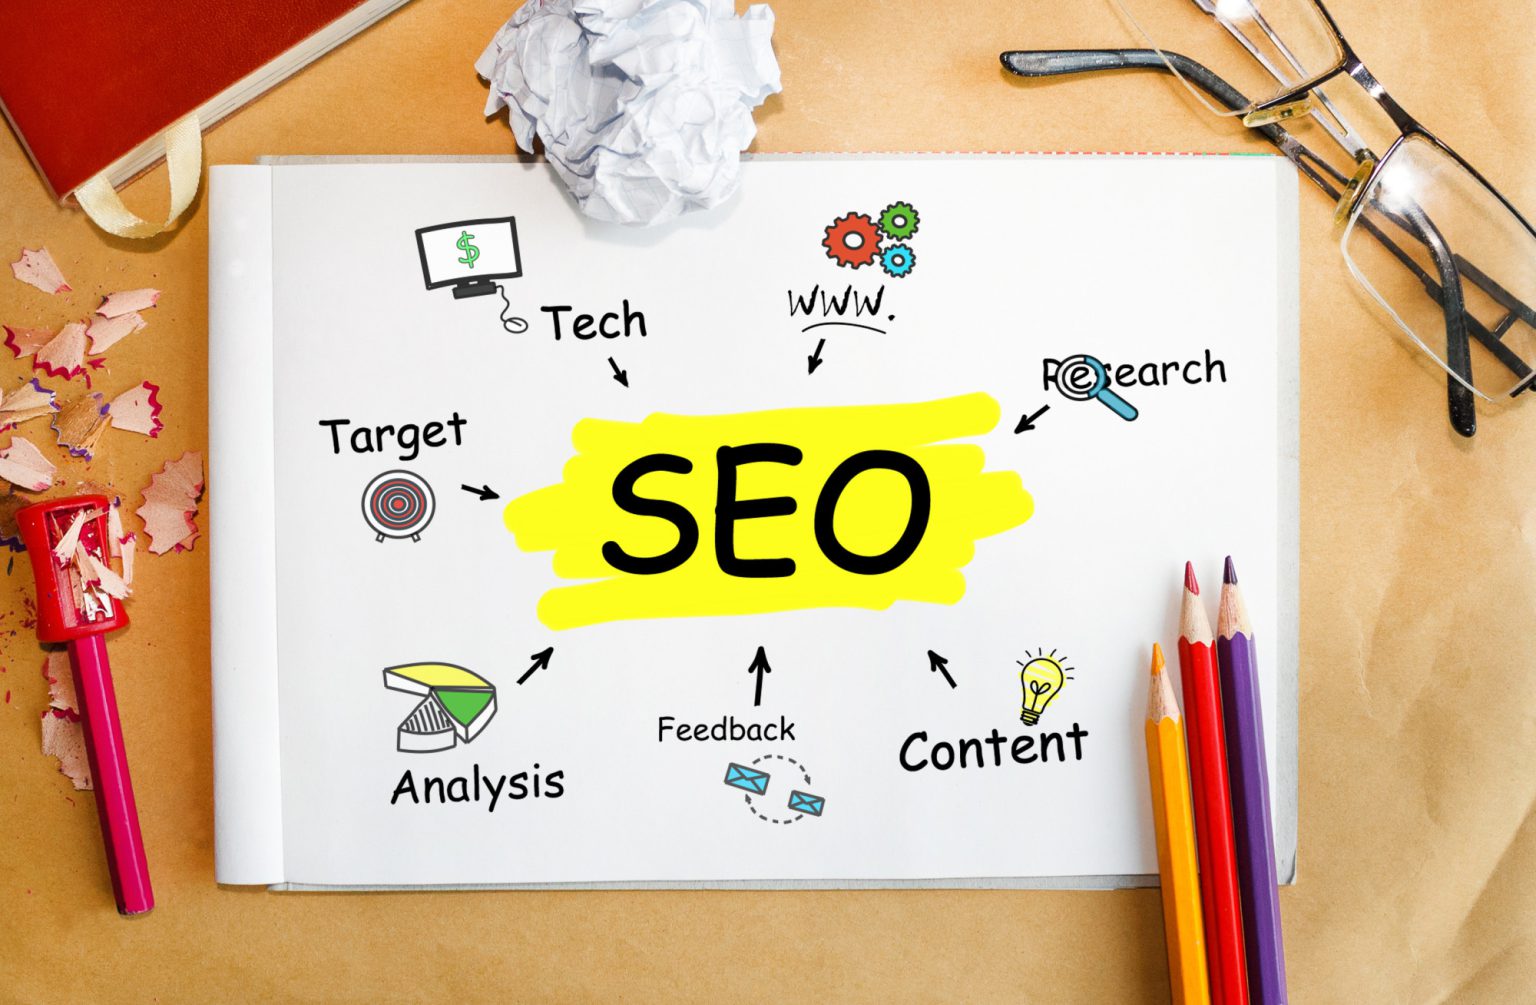 What is Seo?